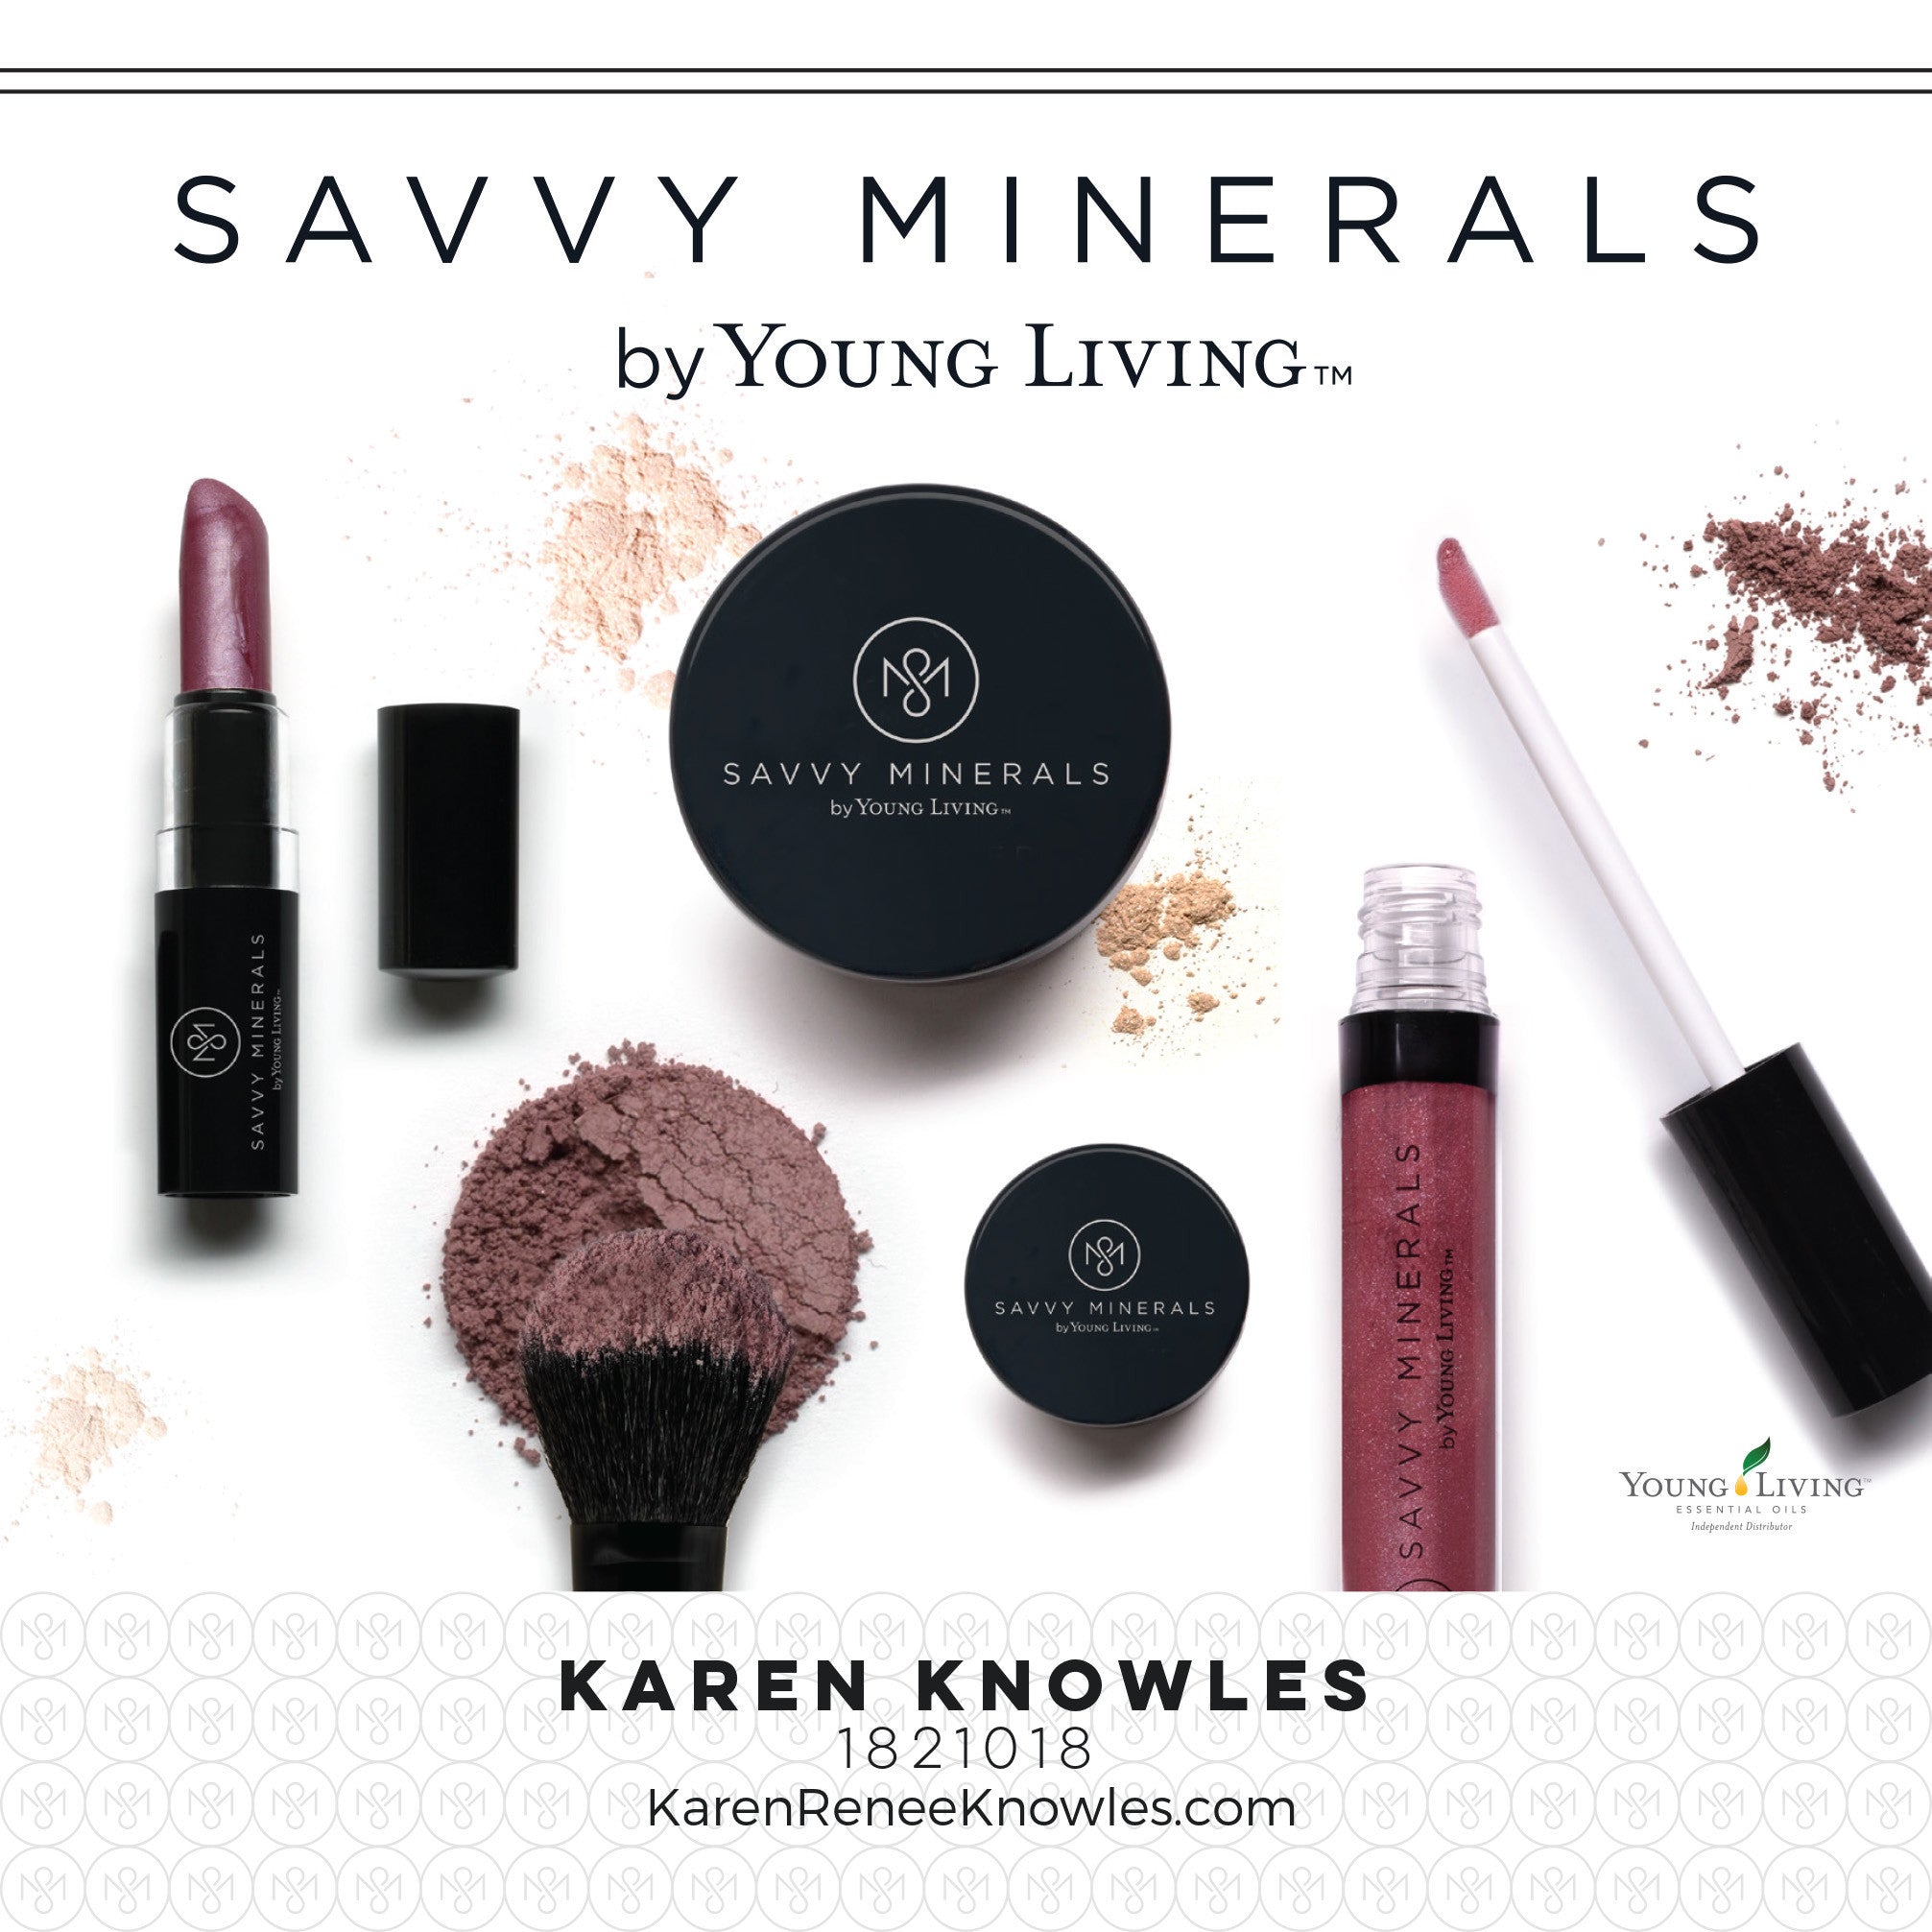 New Young Living Products including Savvy Minerals Natural Make-Up line!!